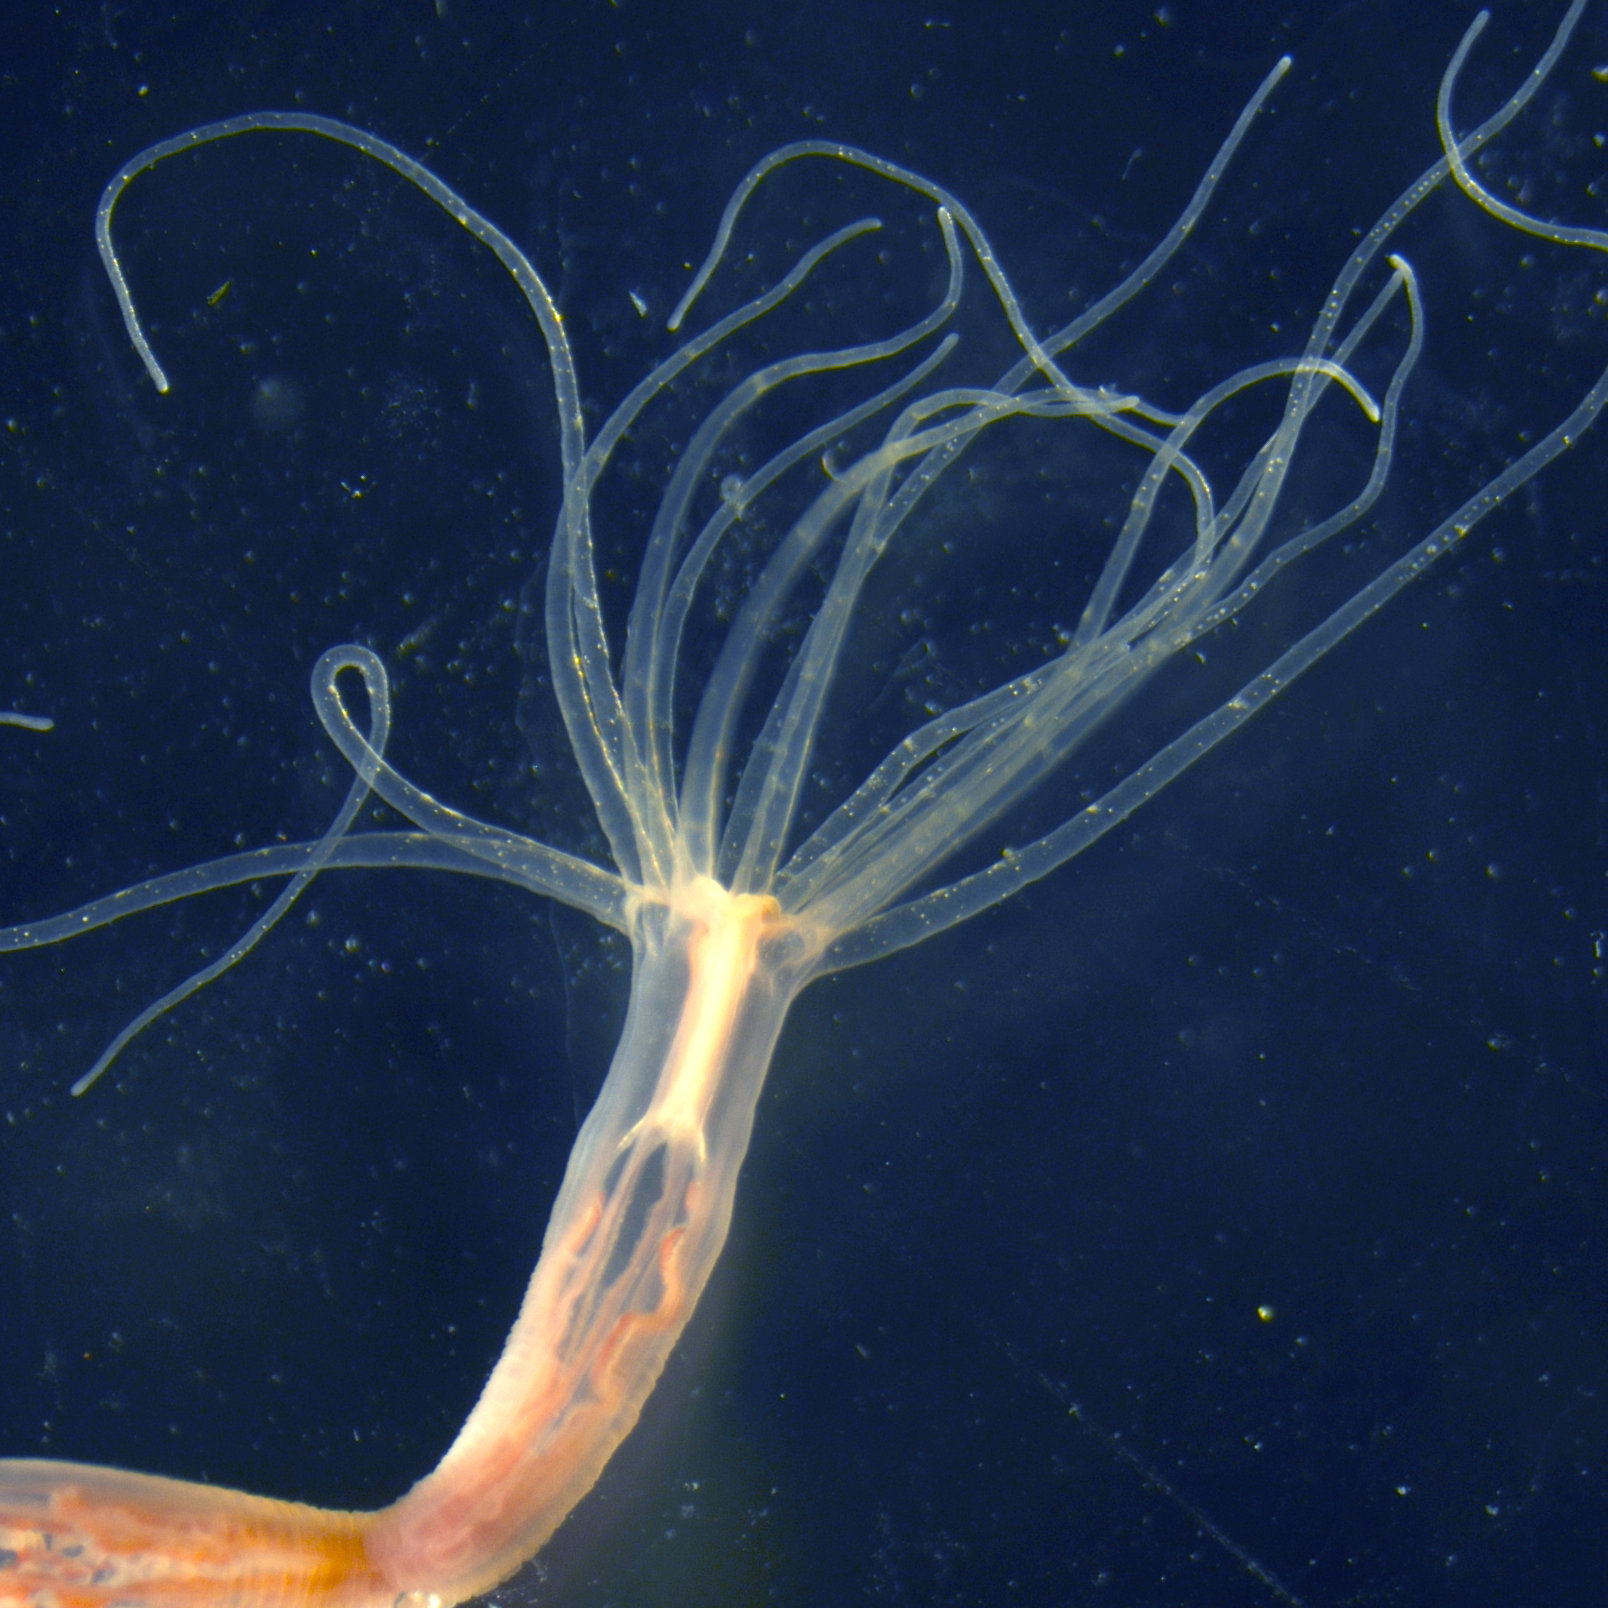 Jellyfish adapt their venom to accommodate changing prey and sea conditions